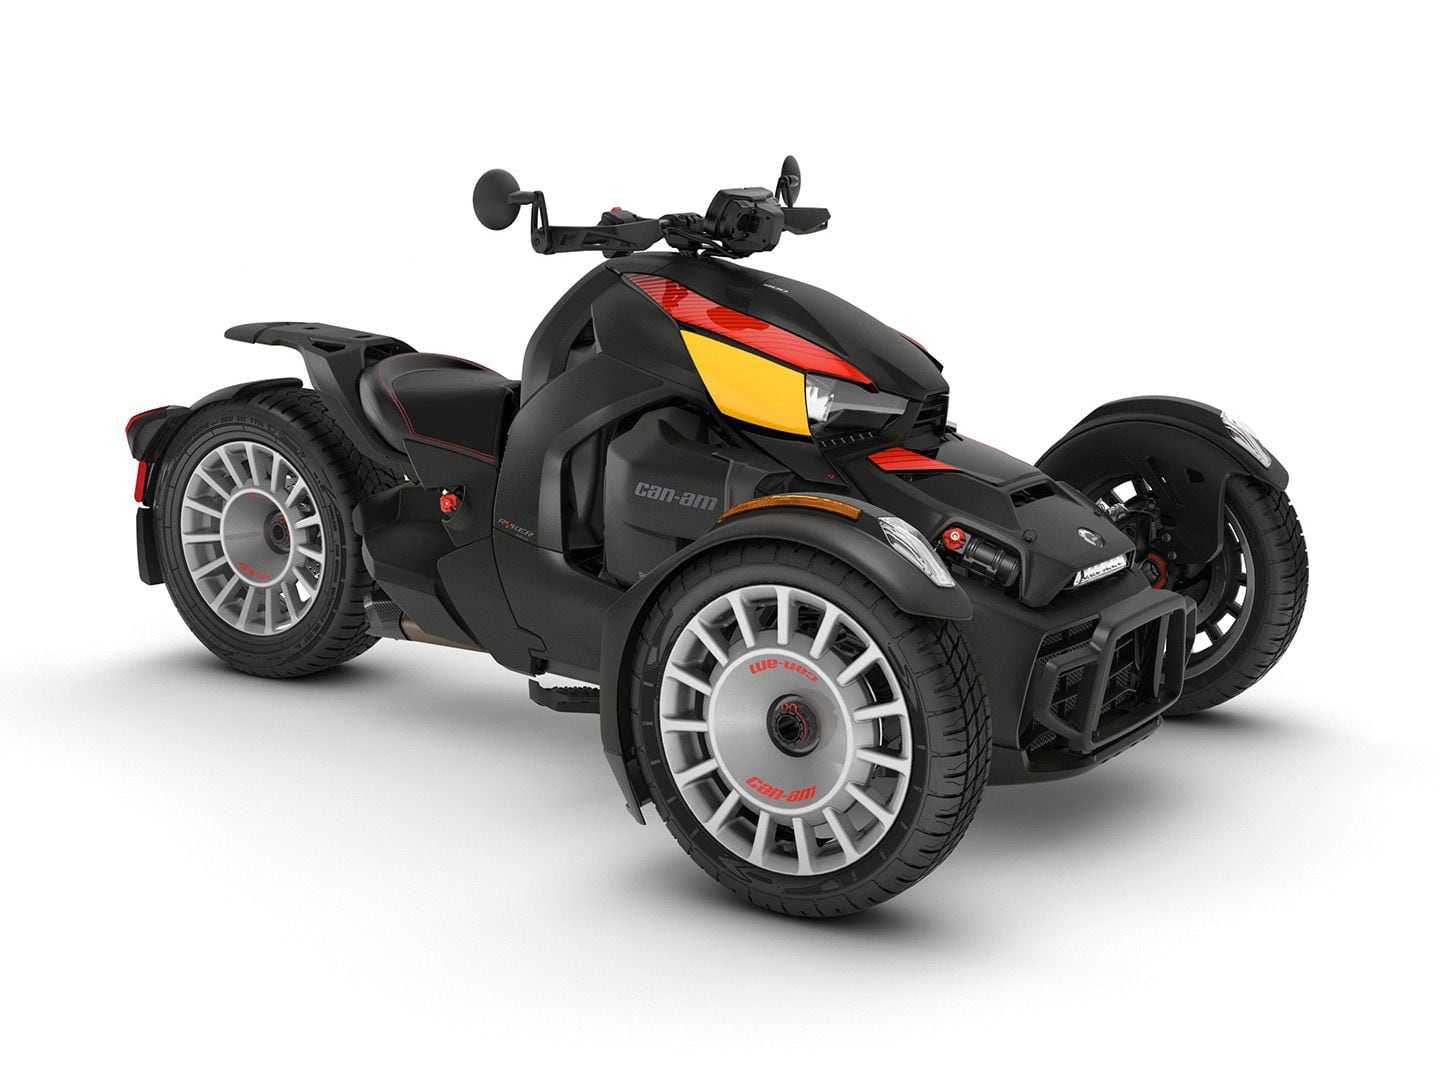 The Can-Am Ryker Rally is perfect for riders who want more stability in their machine and a twist-and-go transmission.